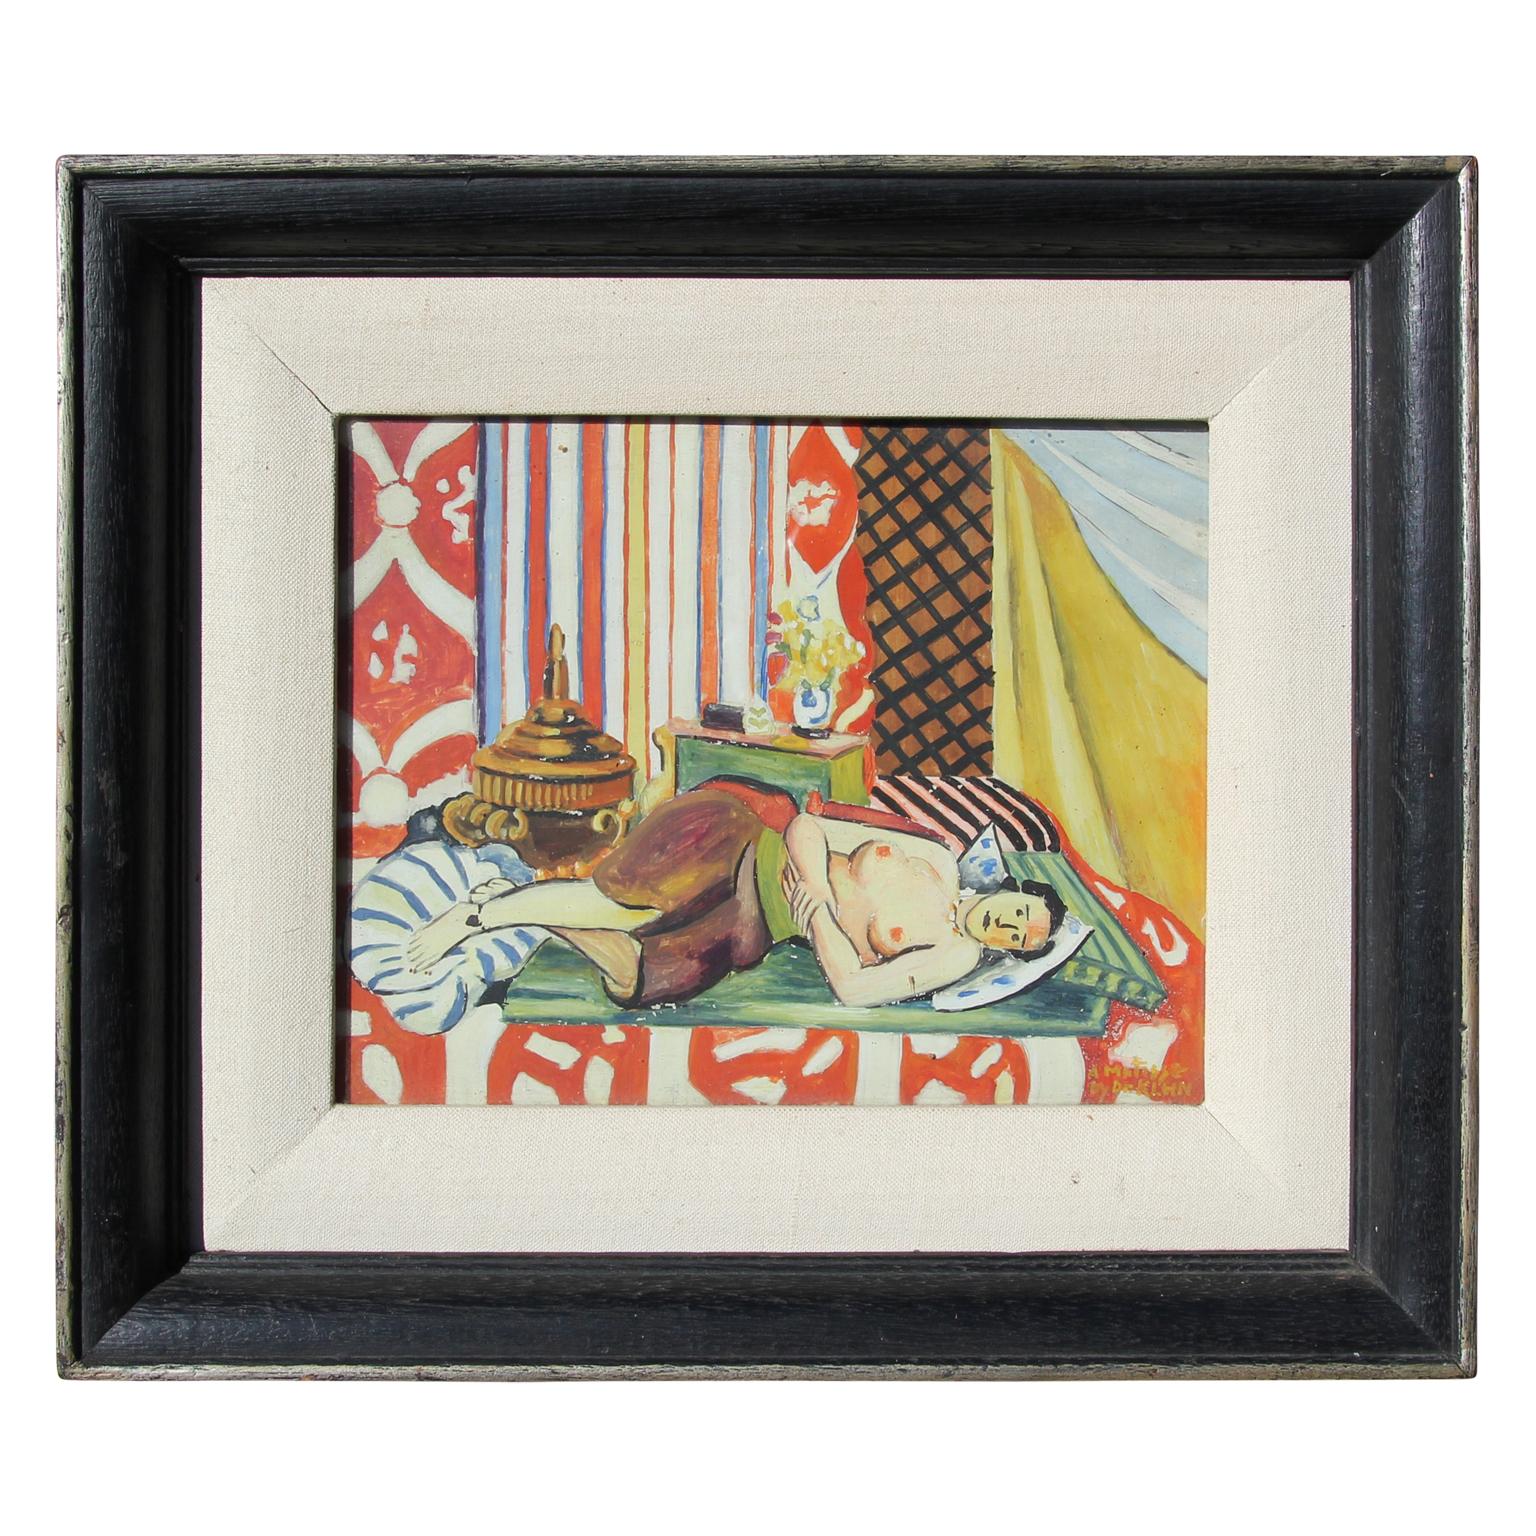 Dr. Joseph Klein Abstract Painting - "A Matisse" Impressionist Reclining Nude